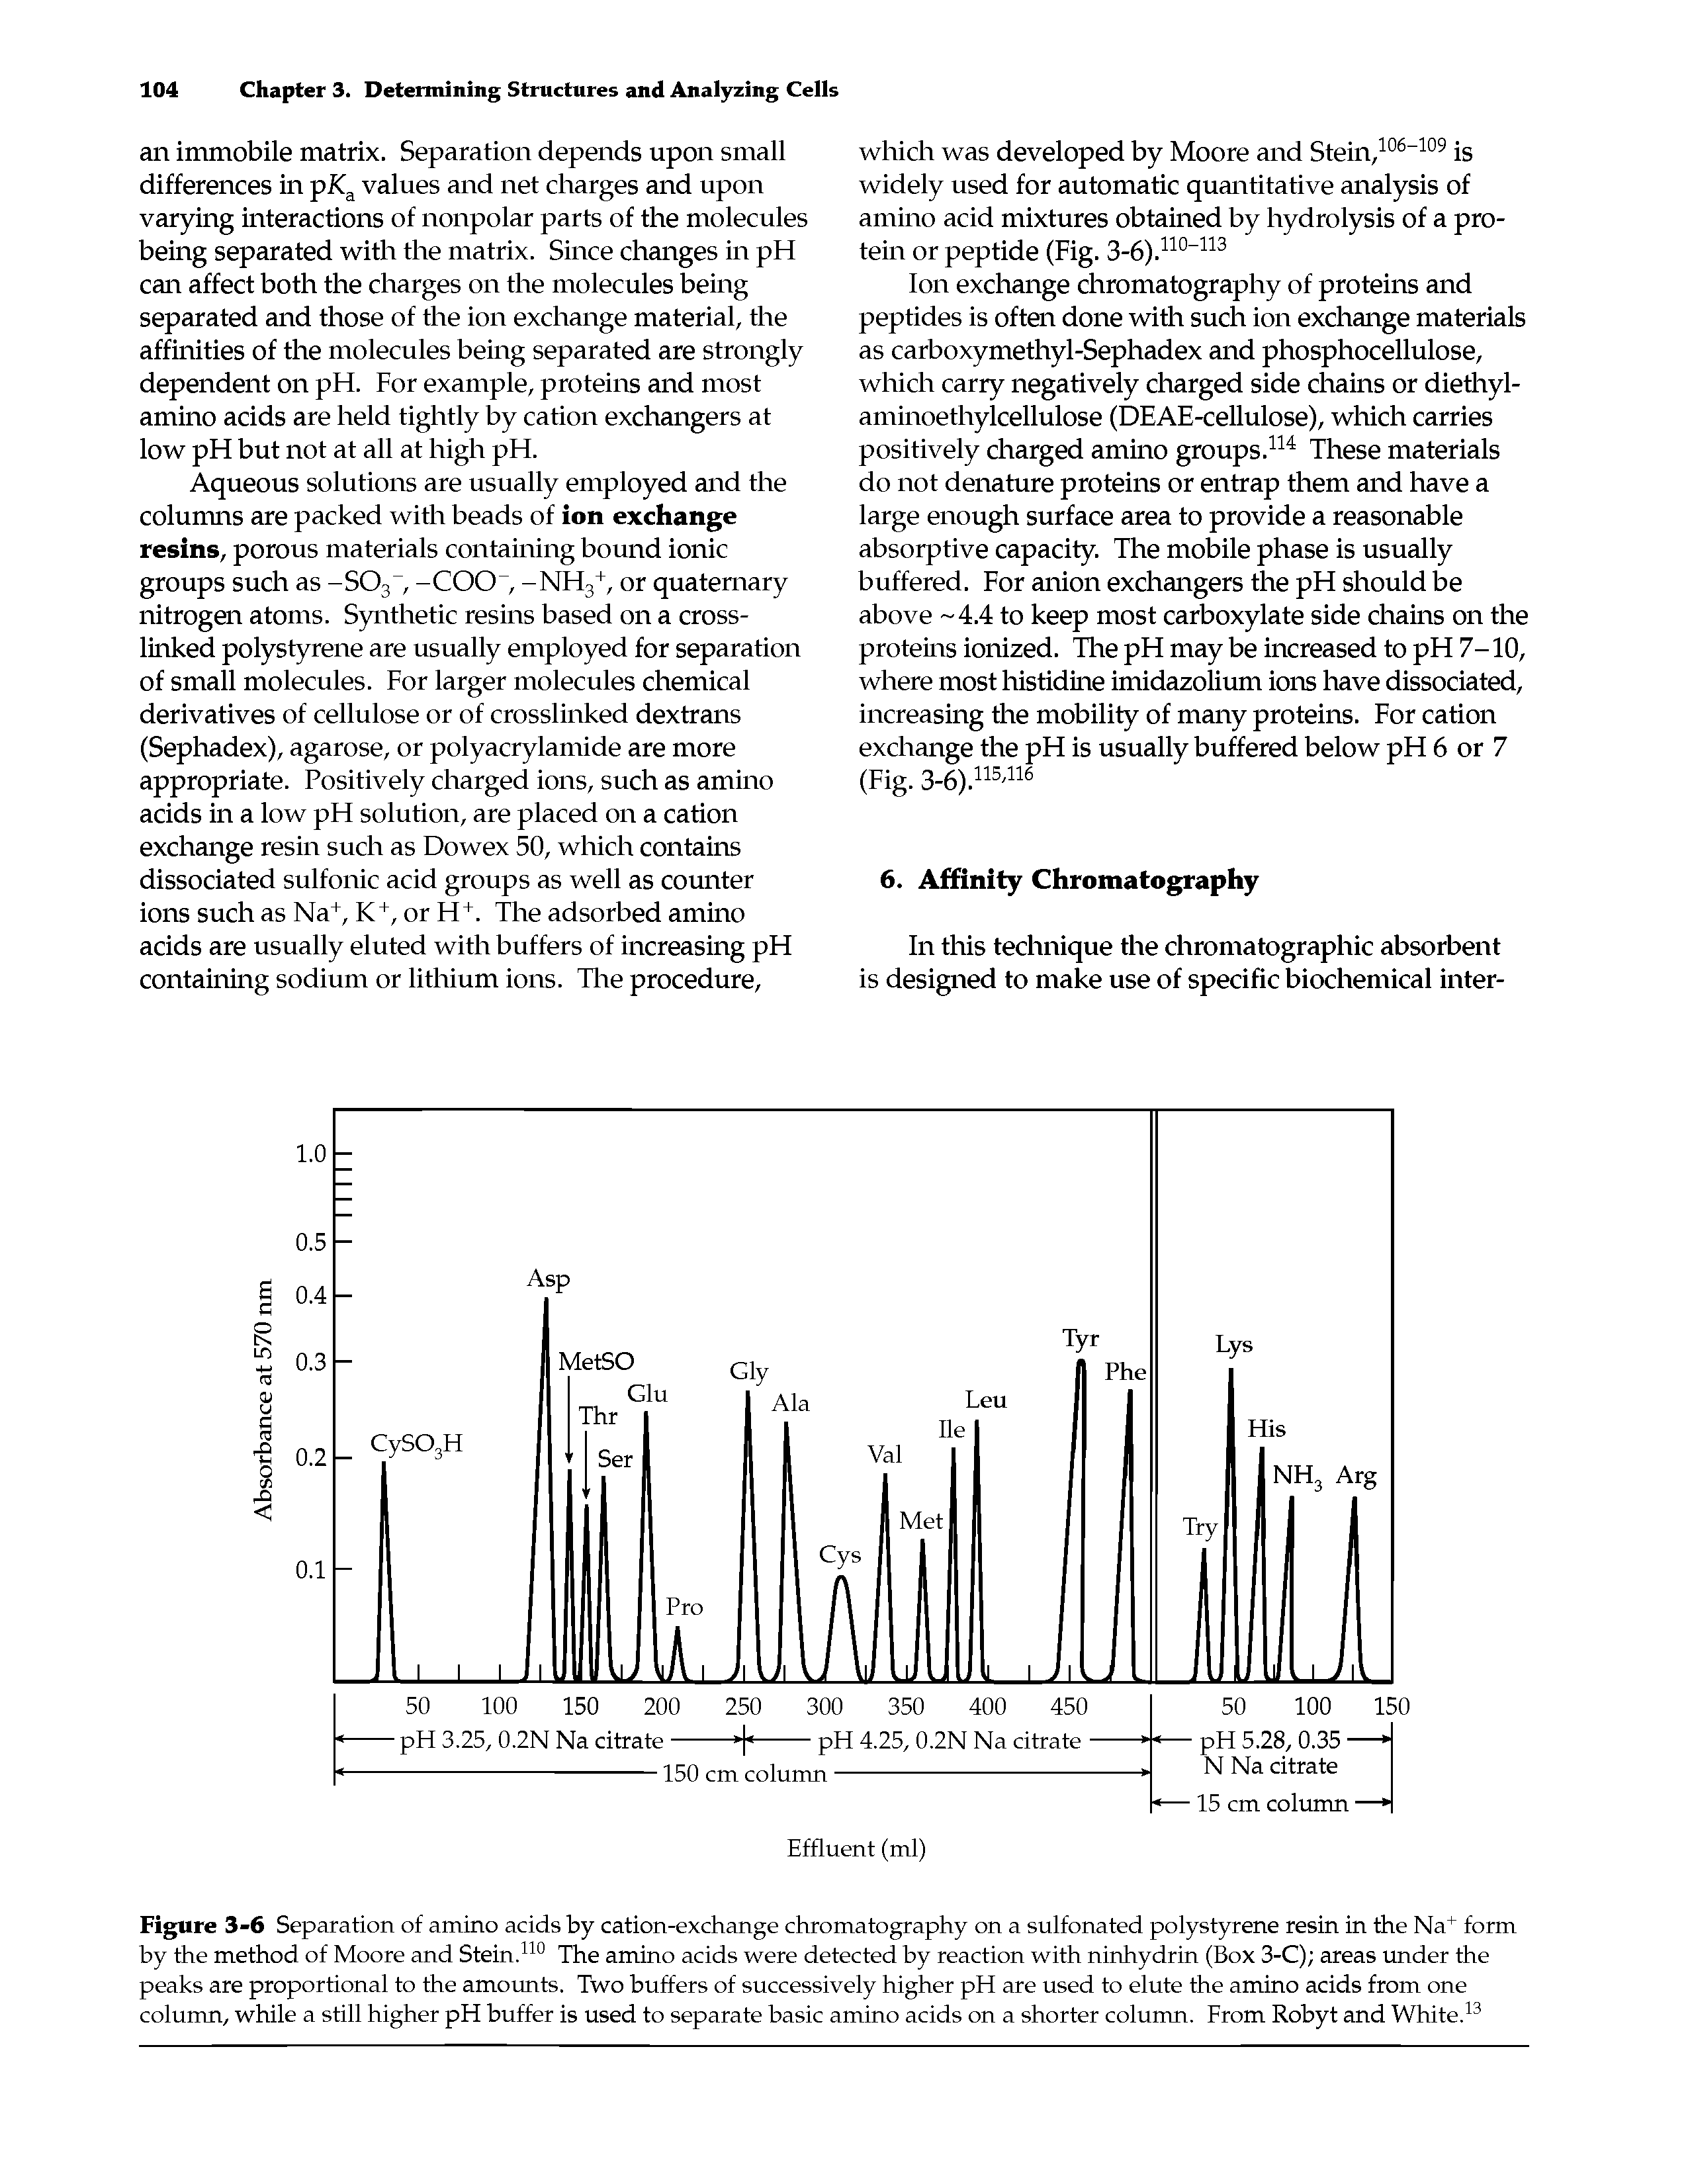 Figure 3-6 Separation of amino acids by cation-exchange chromatography on a sulfonated polystyrene resin in the Na+ form by the method of Moore and Stein.110 The amino acids were detected by reaction with ninhydrin (Box 3-C) areas under the peaks are proportional to the amounts. Two buffers of successively higher pH are used to elute the amino acids from one column, while a still higher pH buffer is used to separate basic amino acids on a shorter column. From Robyt and White.13...